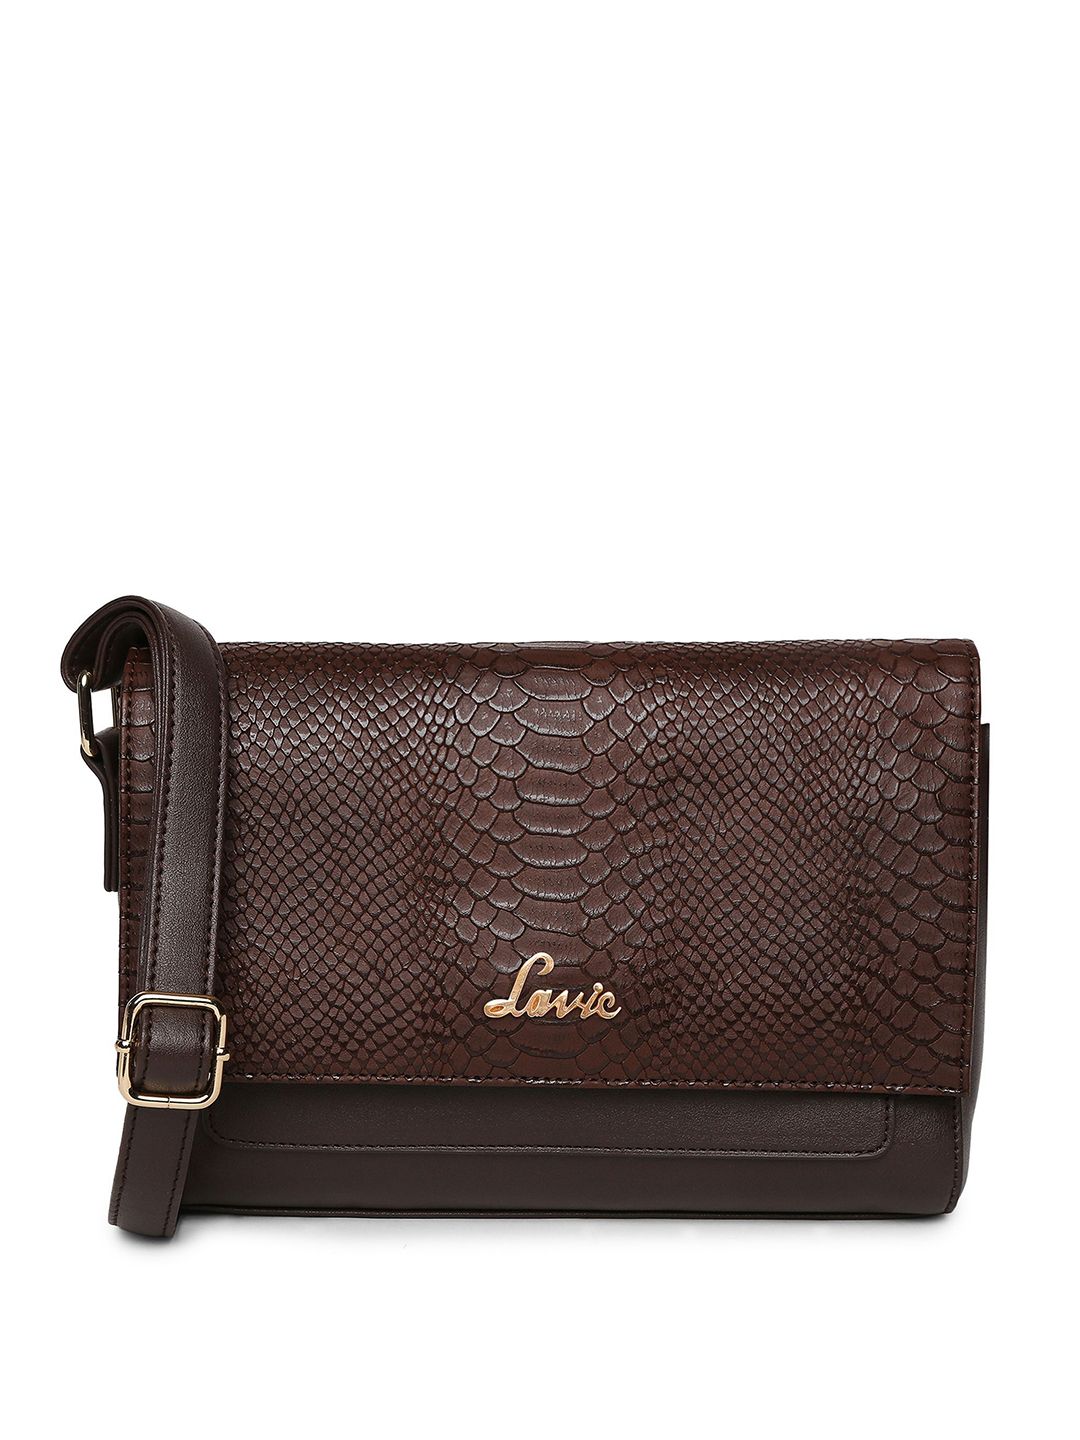 Lavie Coffee Brown Croc Textured Structured Sling Bag with Non-Detachable Sling Strap Price in India